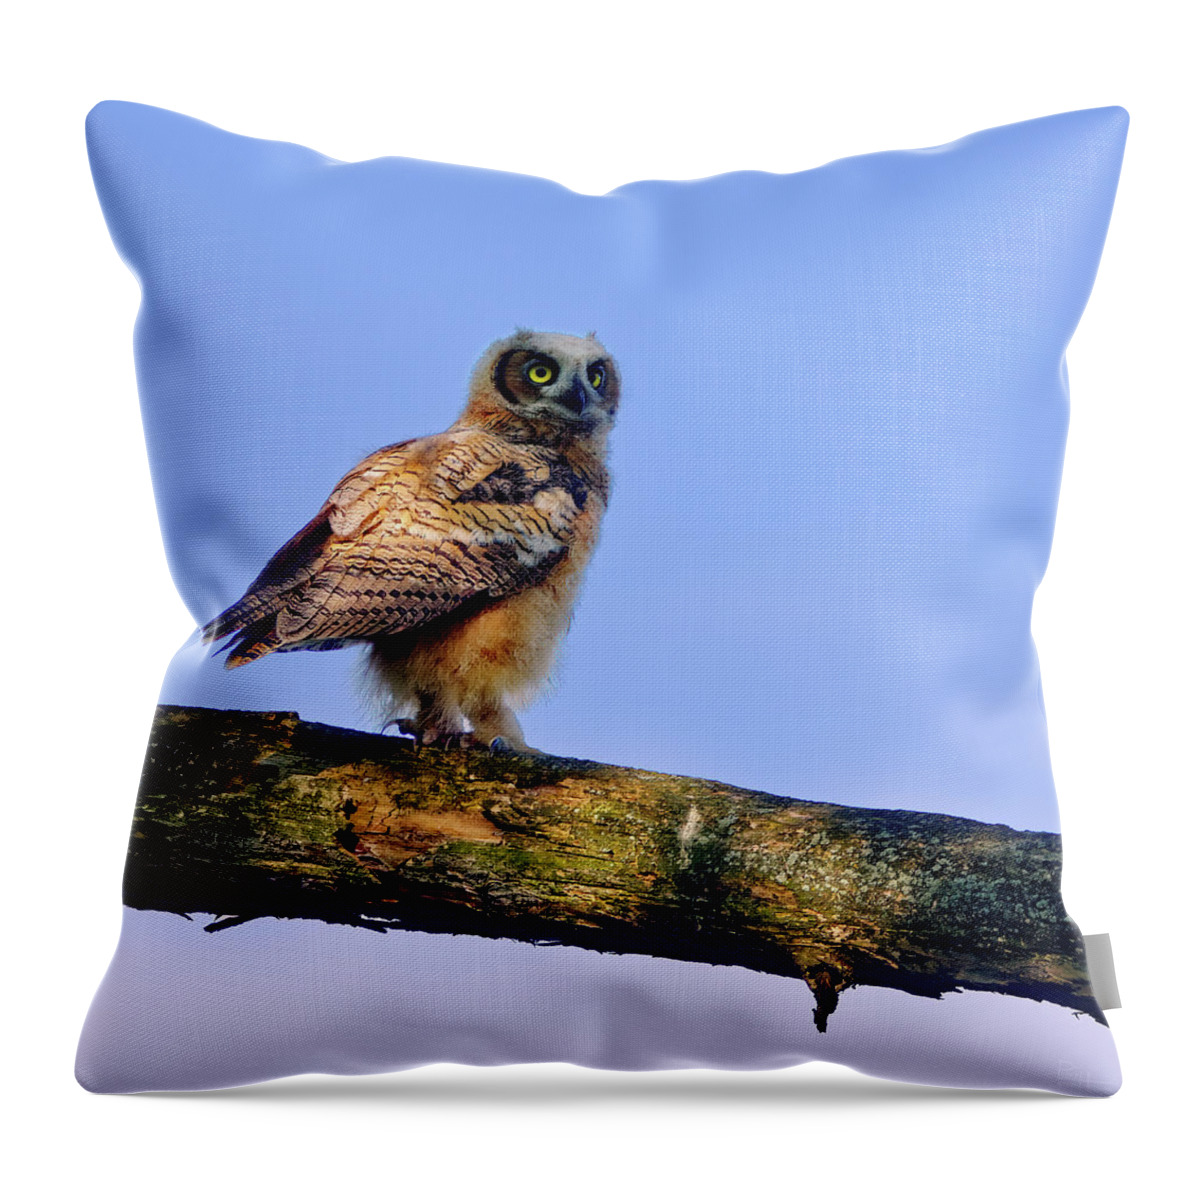 Owl Throw Pillow featuring the photograph Fledgling Great Horned Owl by Peter Herman